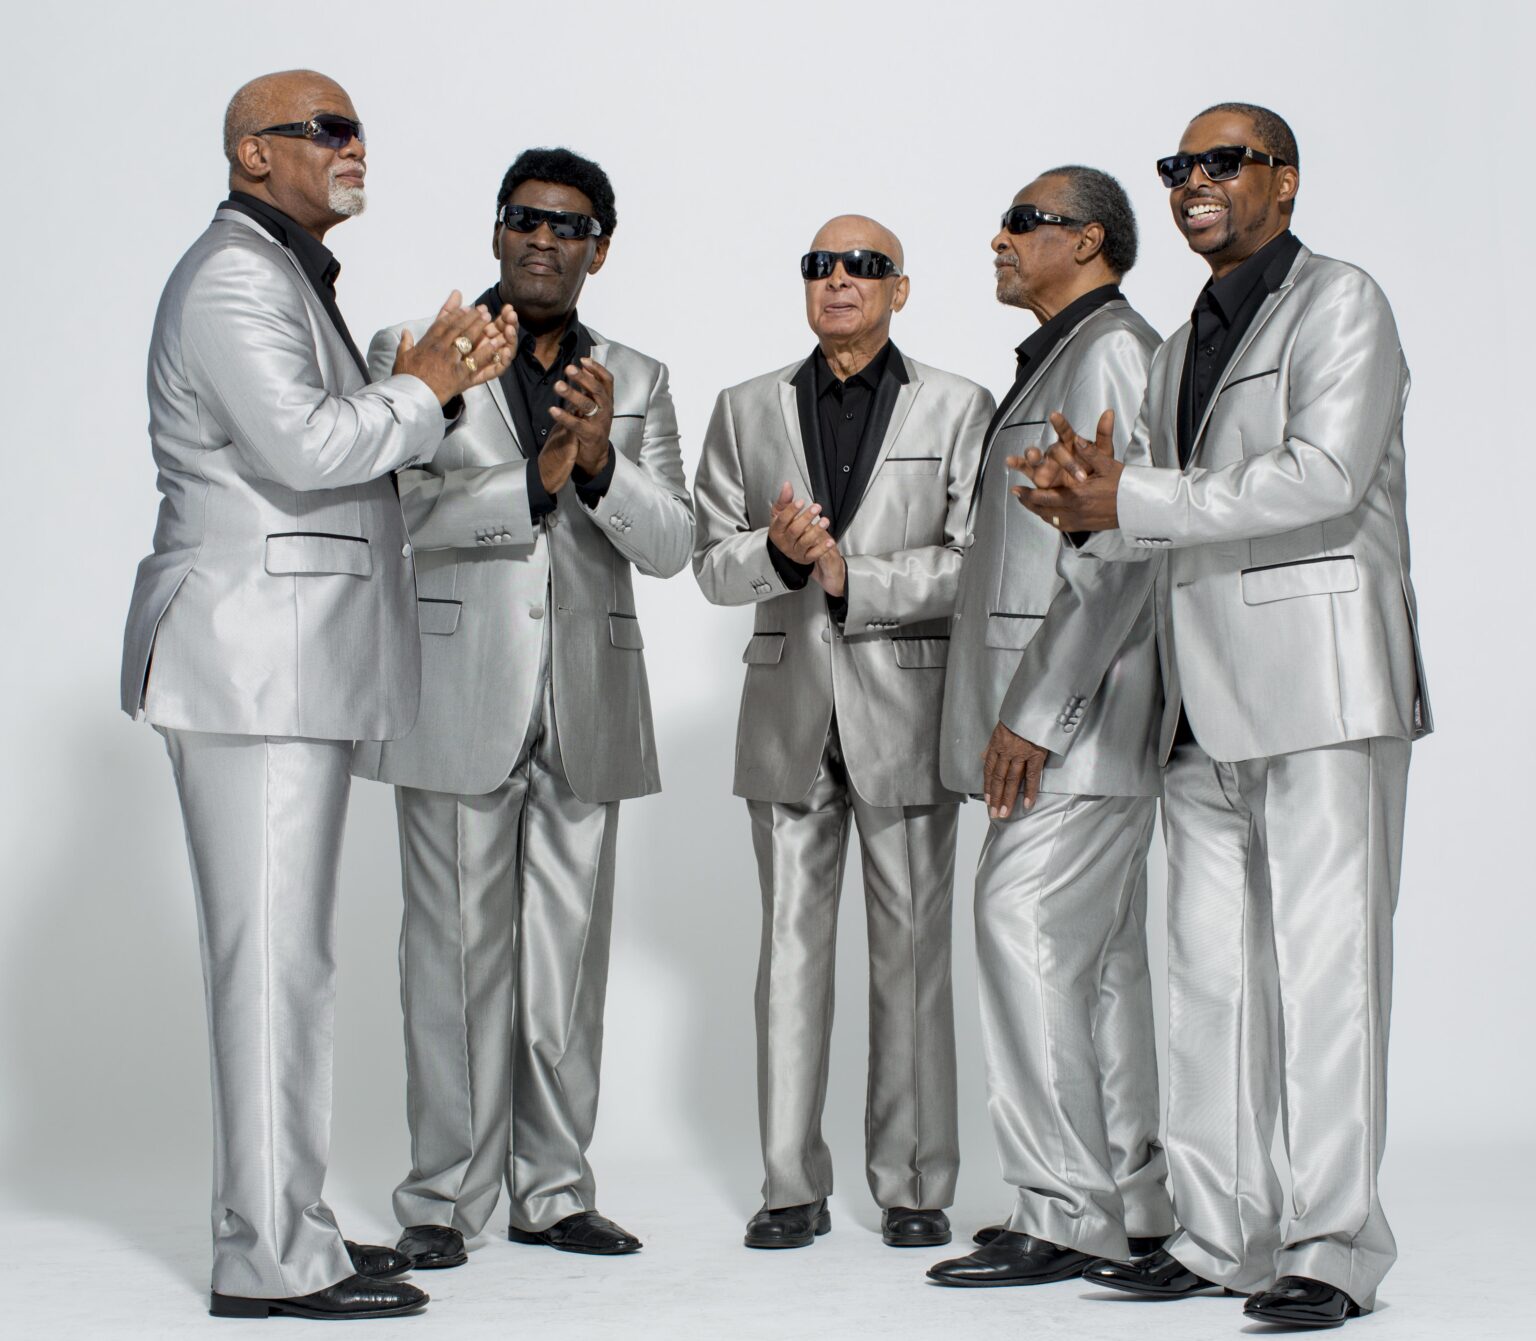 The Blind Boys of Alabama will bring their Grammy Award-winning gospel sounds to Mount Vernon for a Sunday